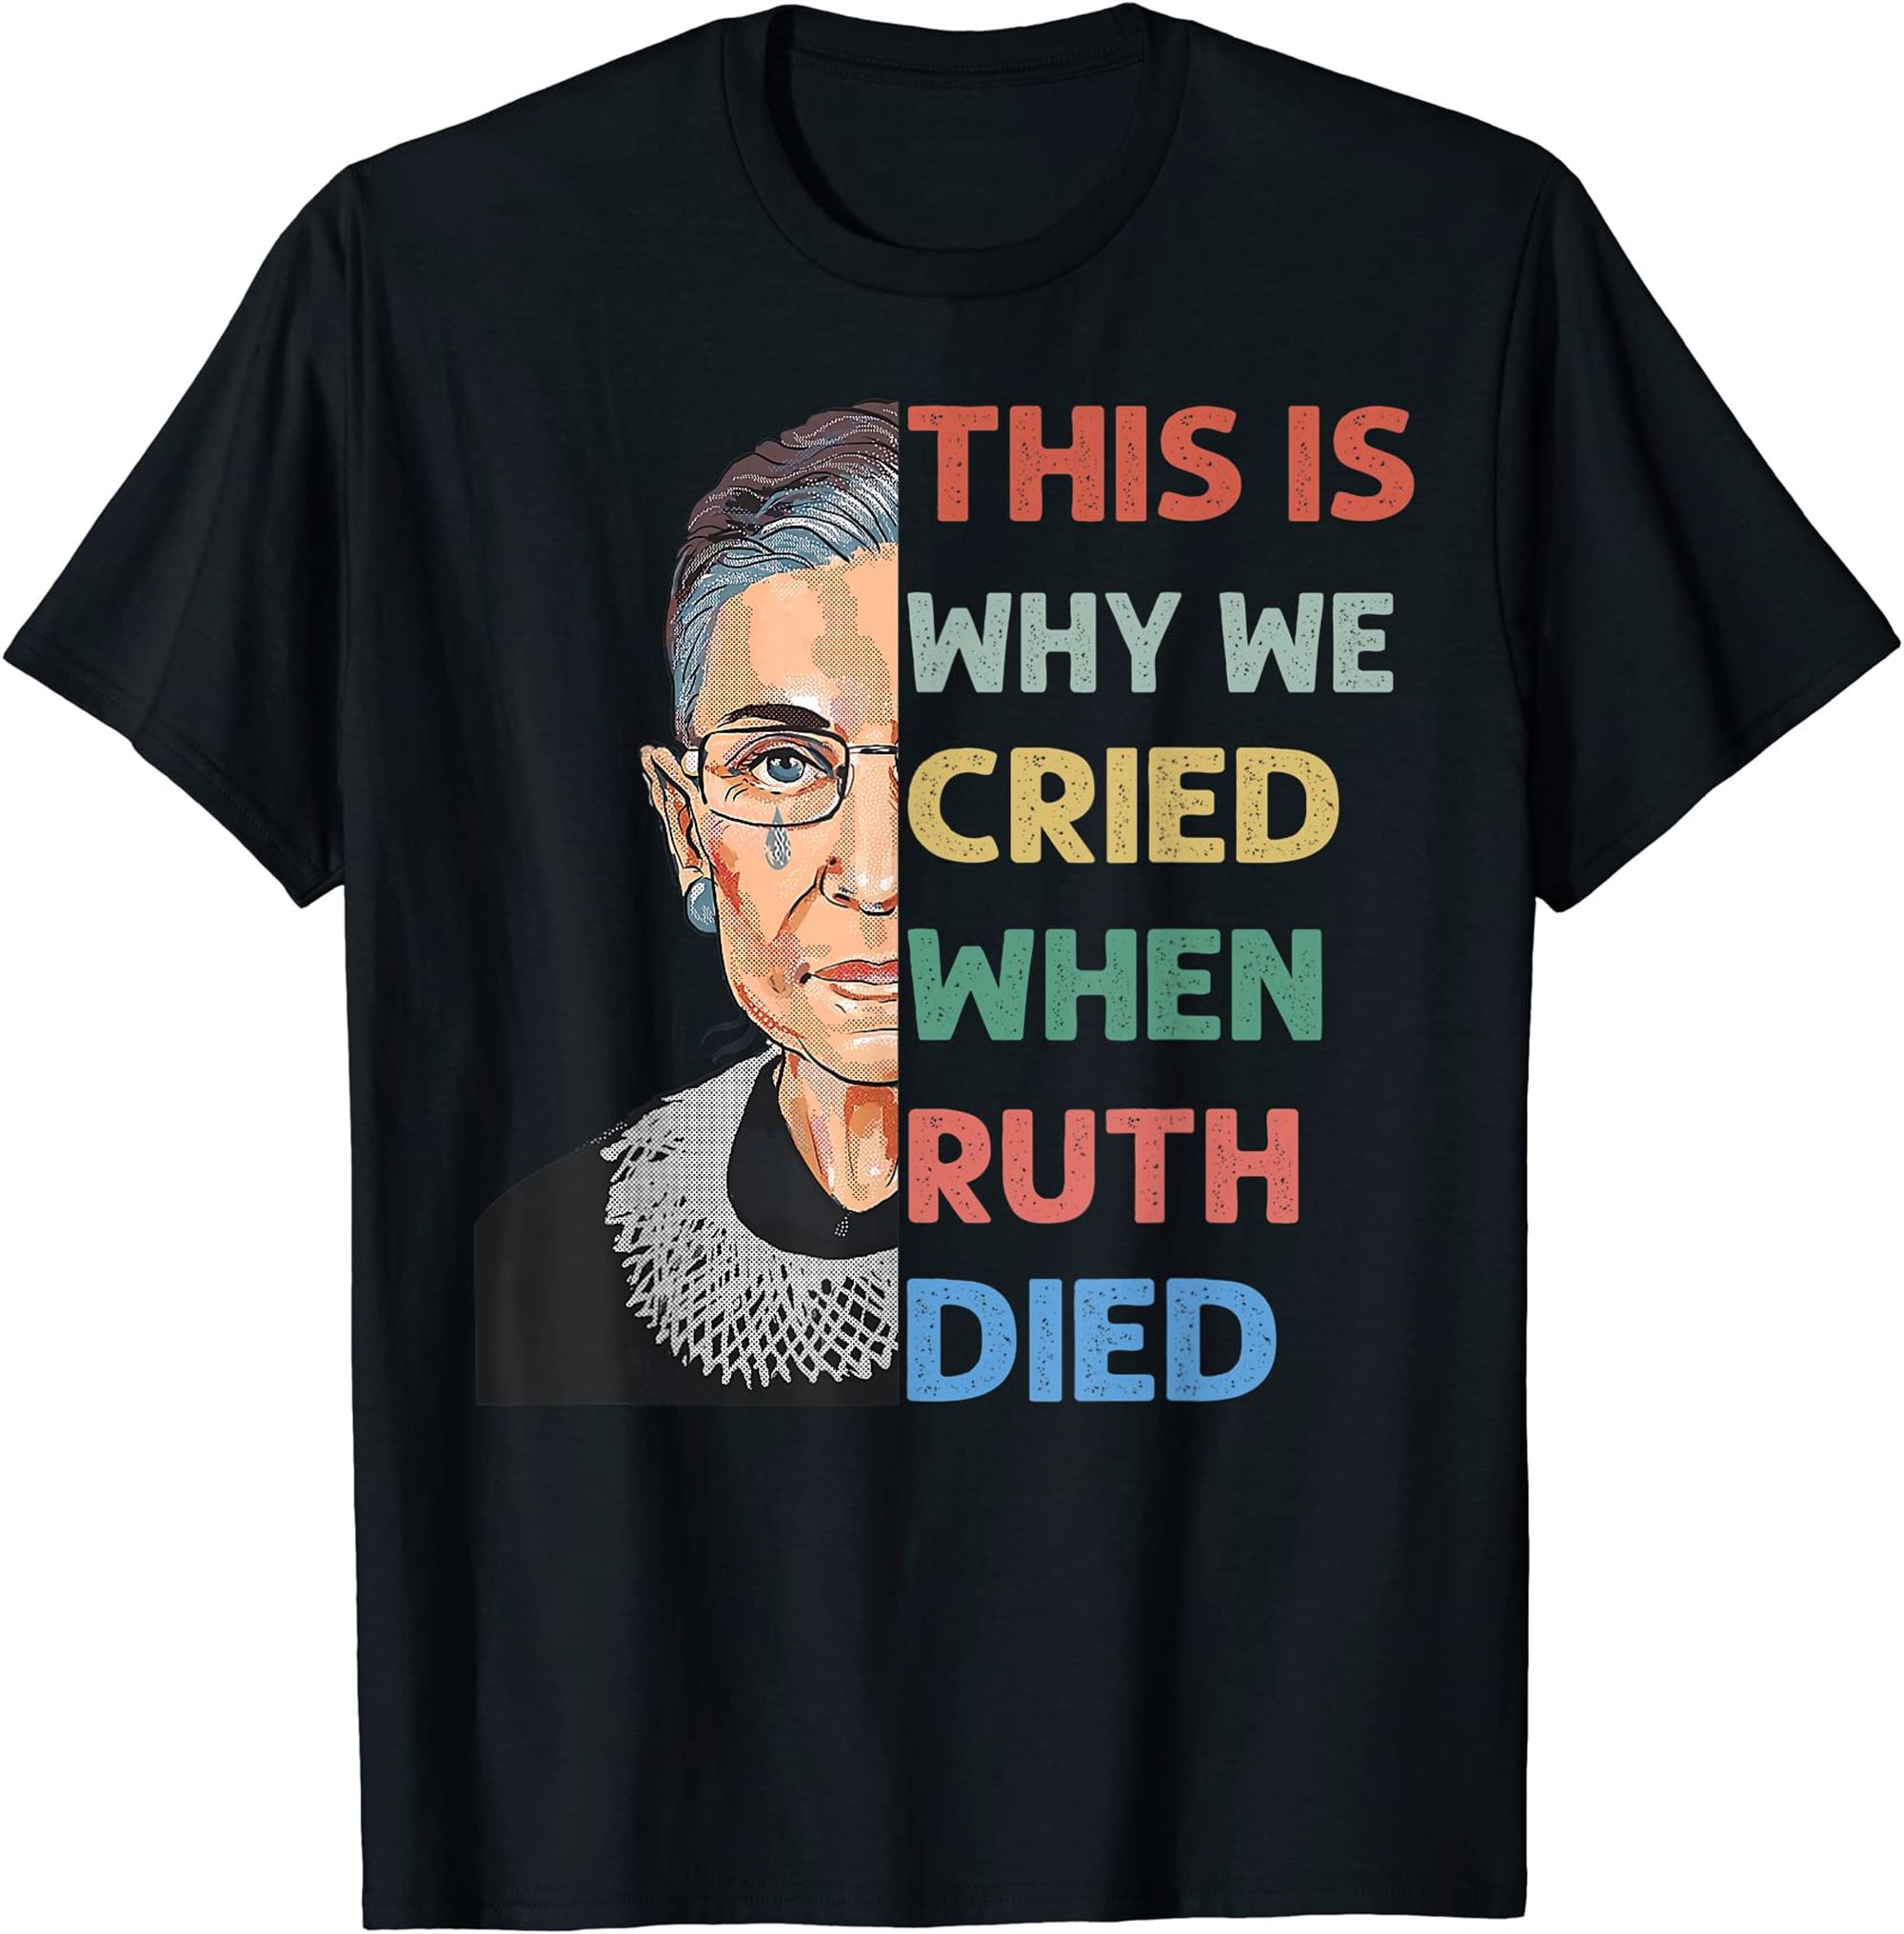 Rbg This Is Why We Cried Pro Choice Shirt Feminist Prochoice T Shirt Size Up To 5xl